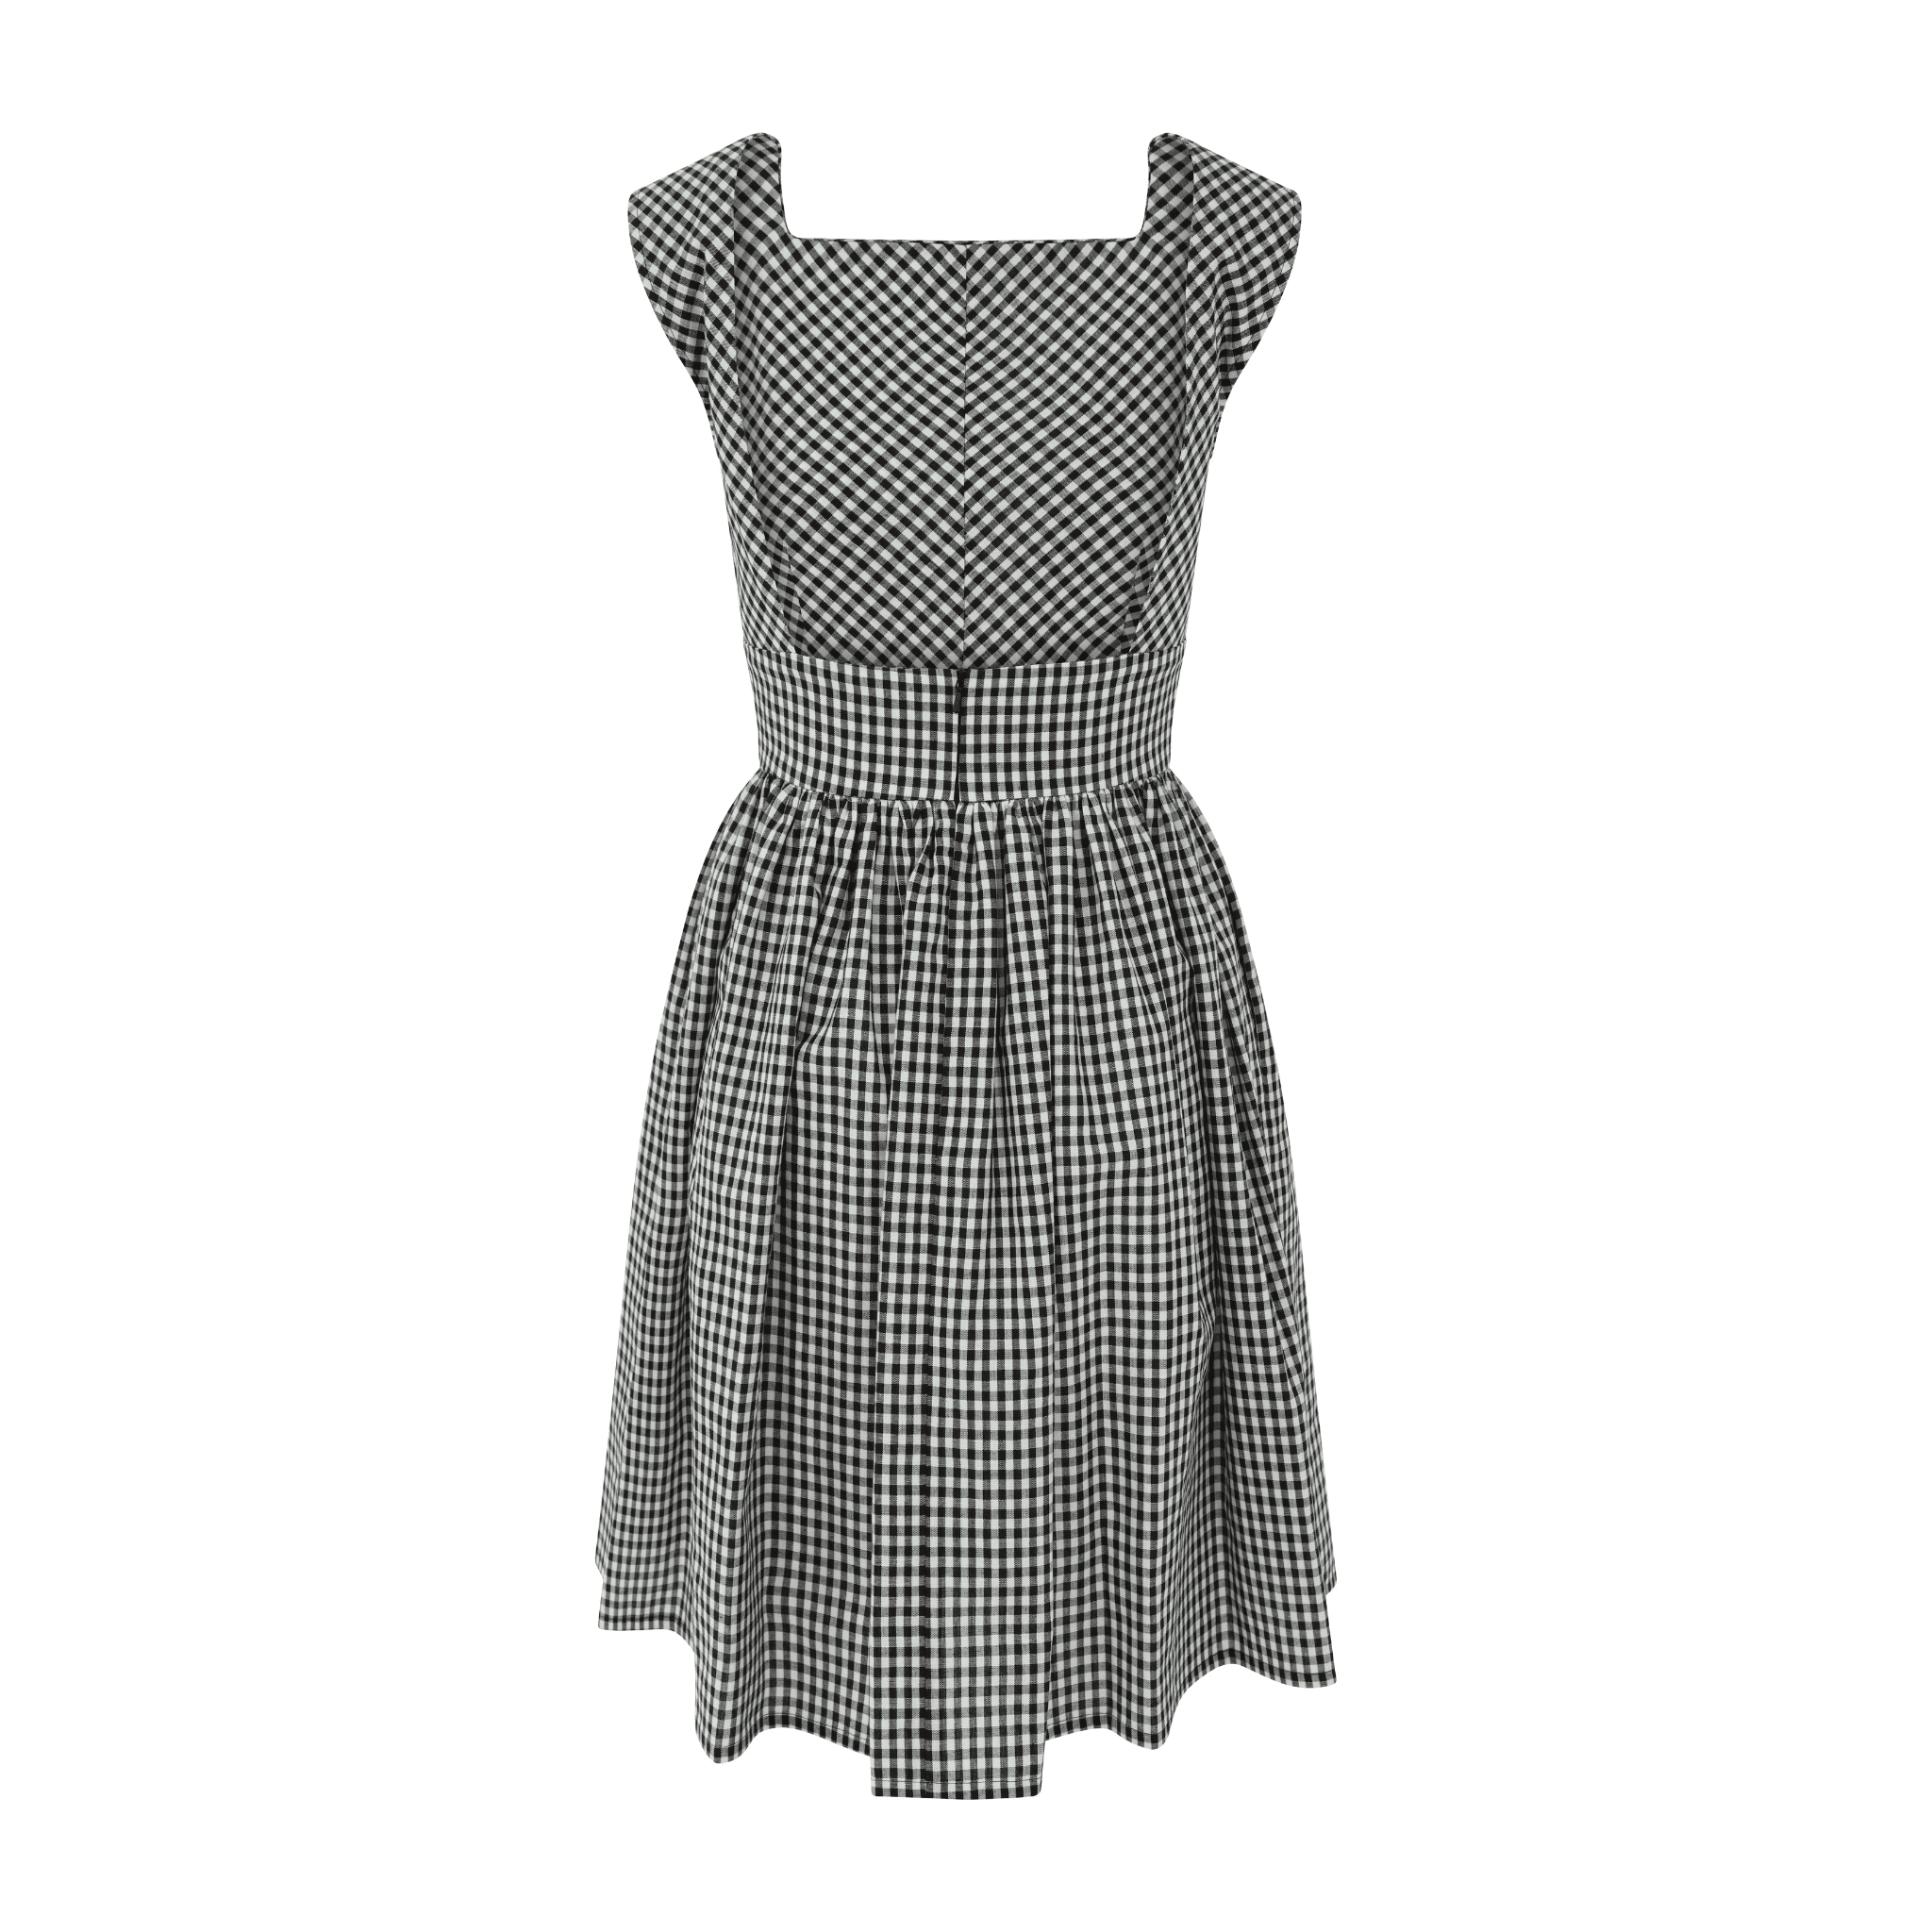 Low Back Pinafore Dress with Pockets - Sophia